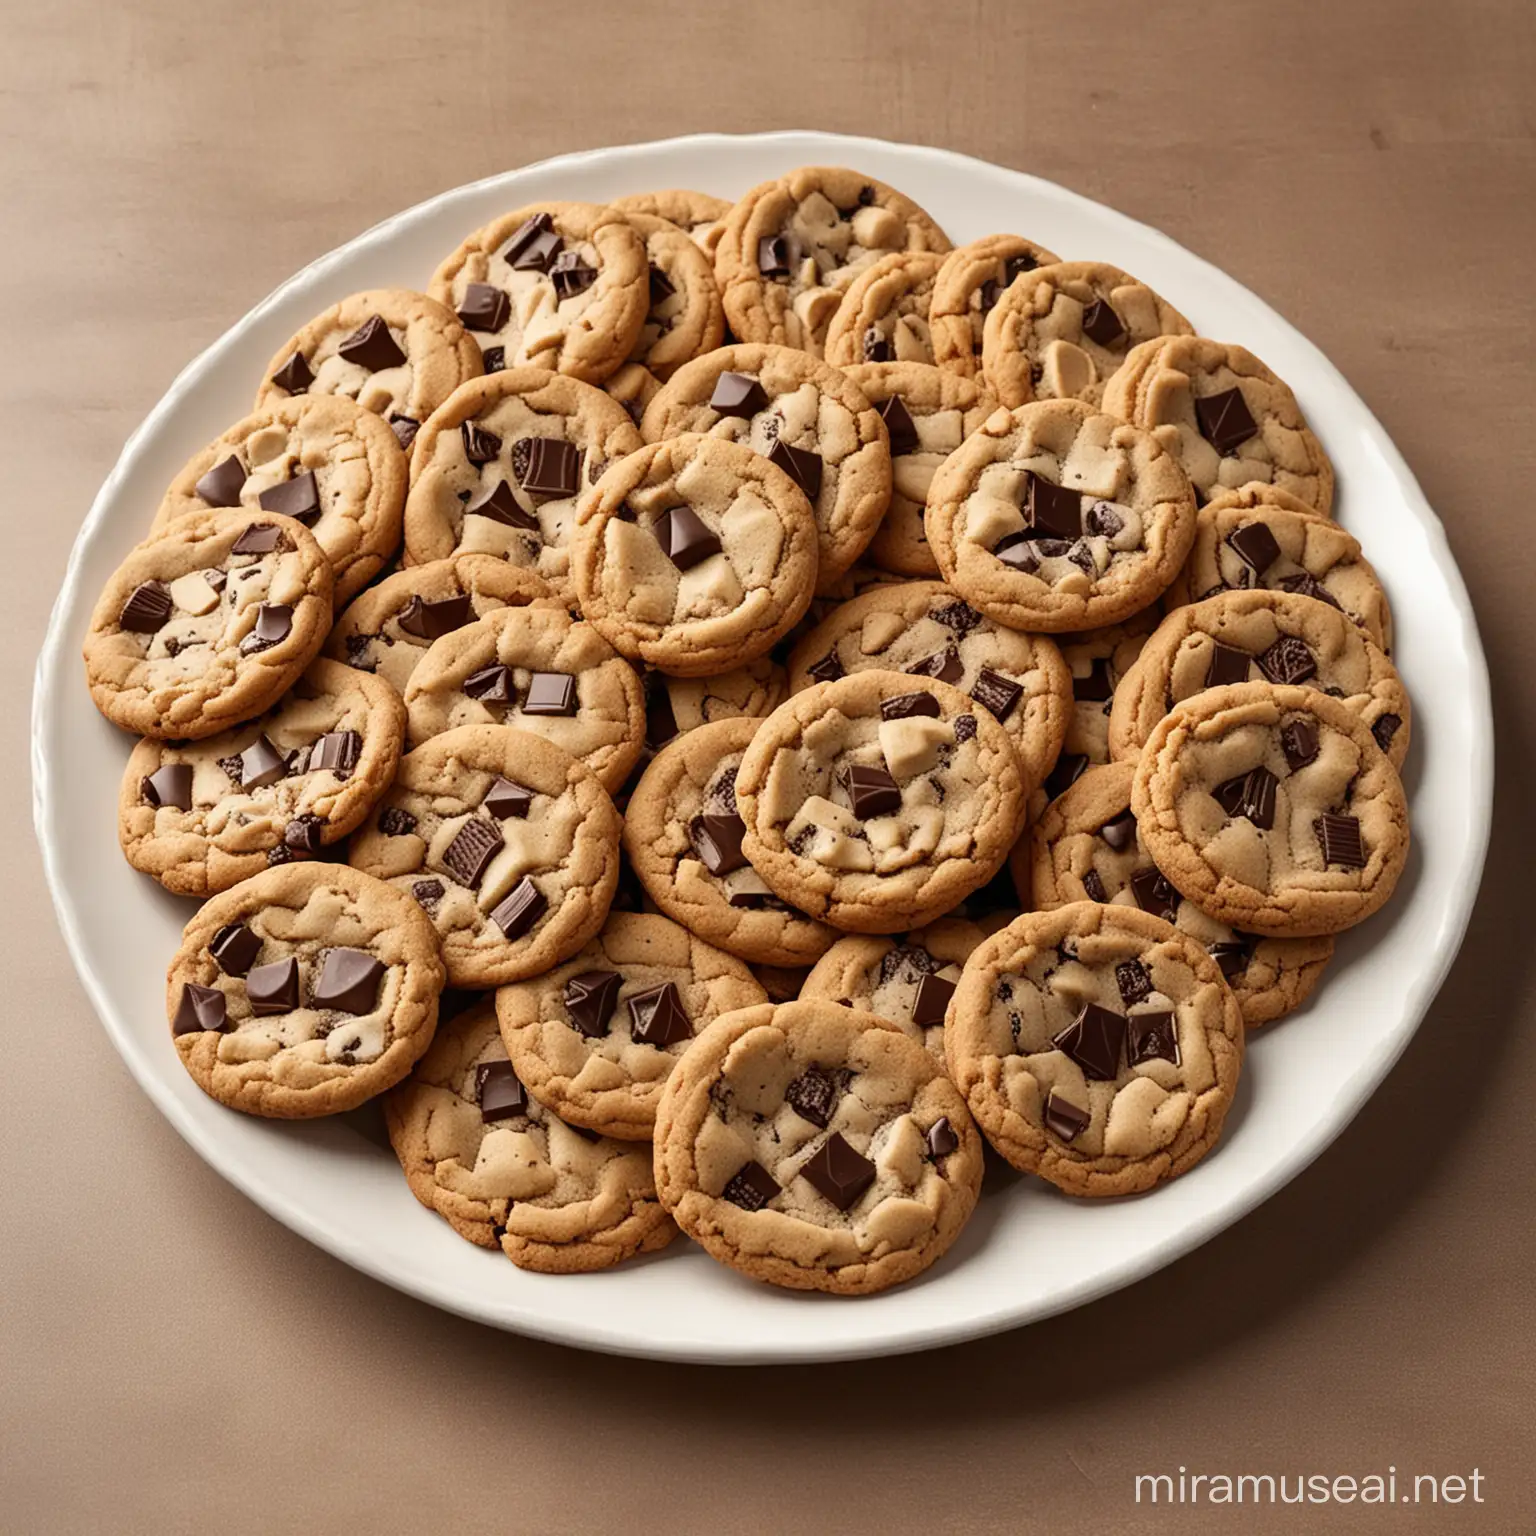 I want a side view image of a round white plate filled with toasted cookies. Each cookie is decorated with dark chocolate chunks. The background is simple and neutral in color, highlighting the plate and cookies. The lighting of the image is soft, showing the details and shapes of the chocolate chunks on the surface of each cookie.